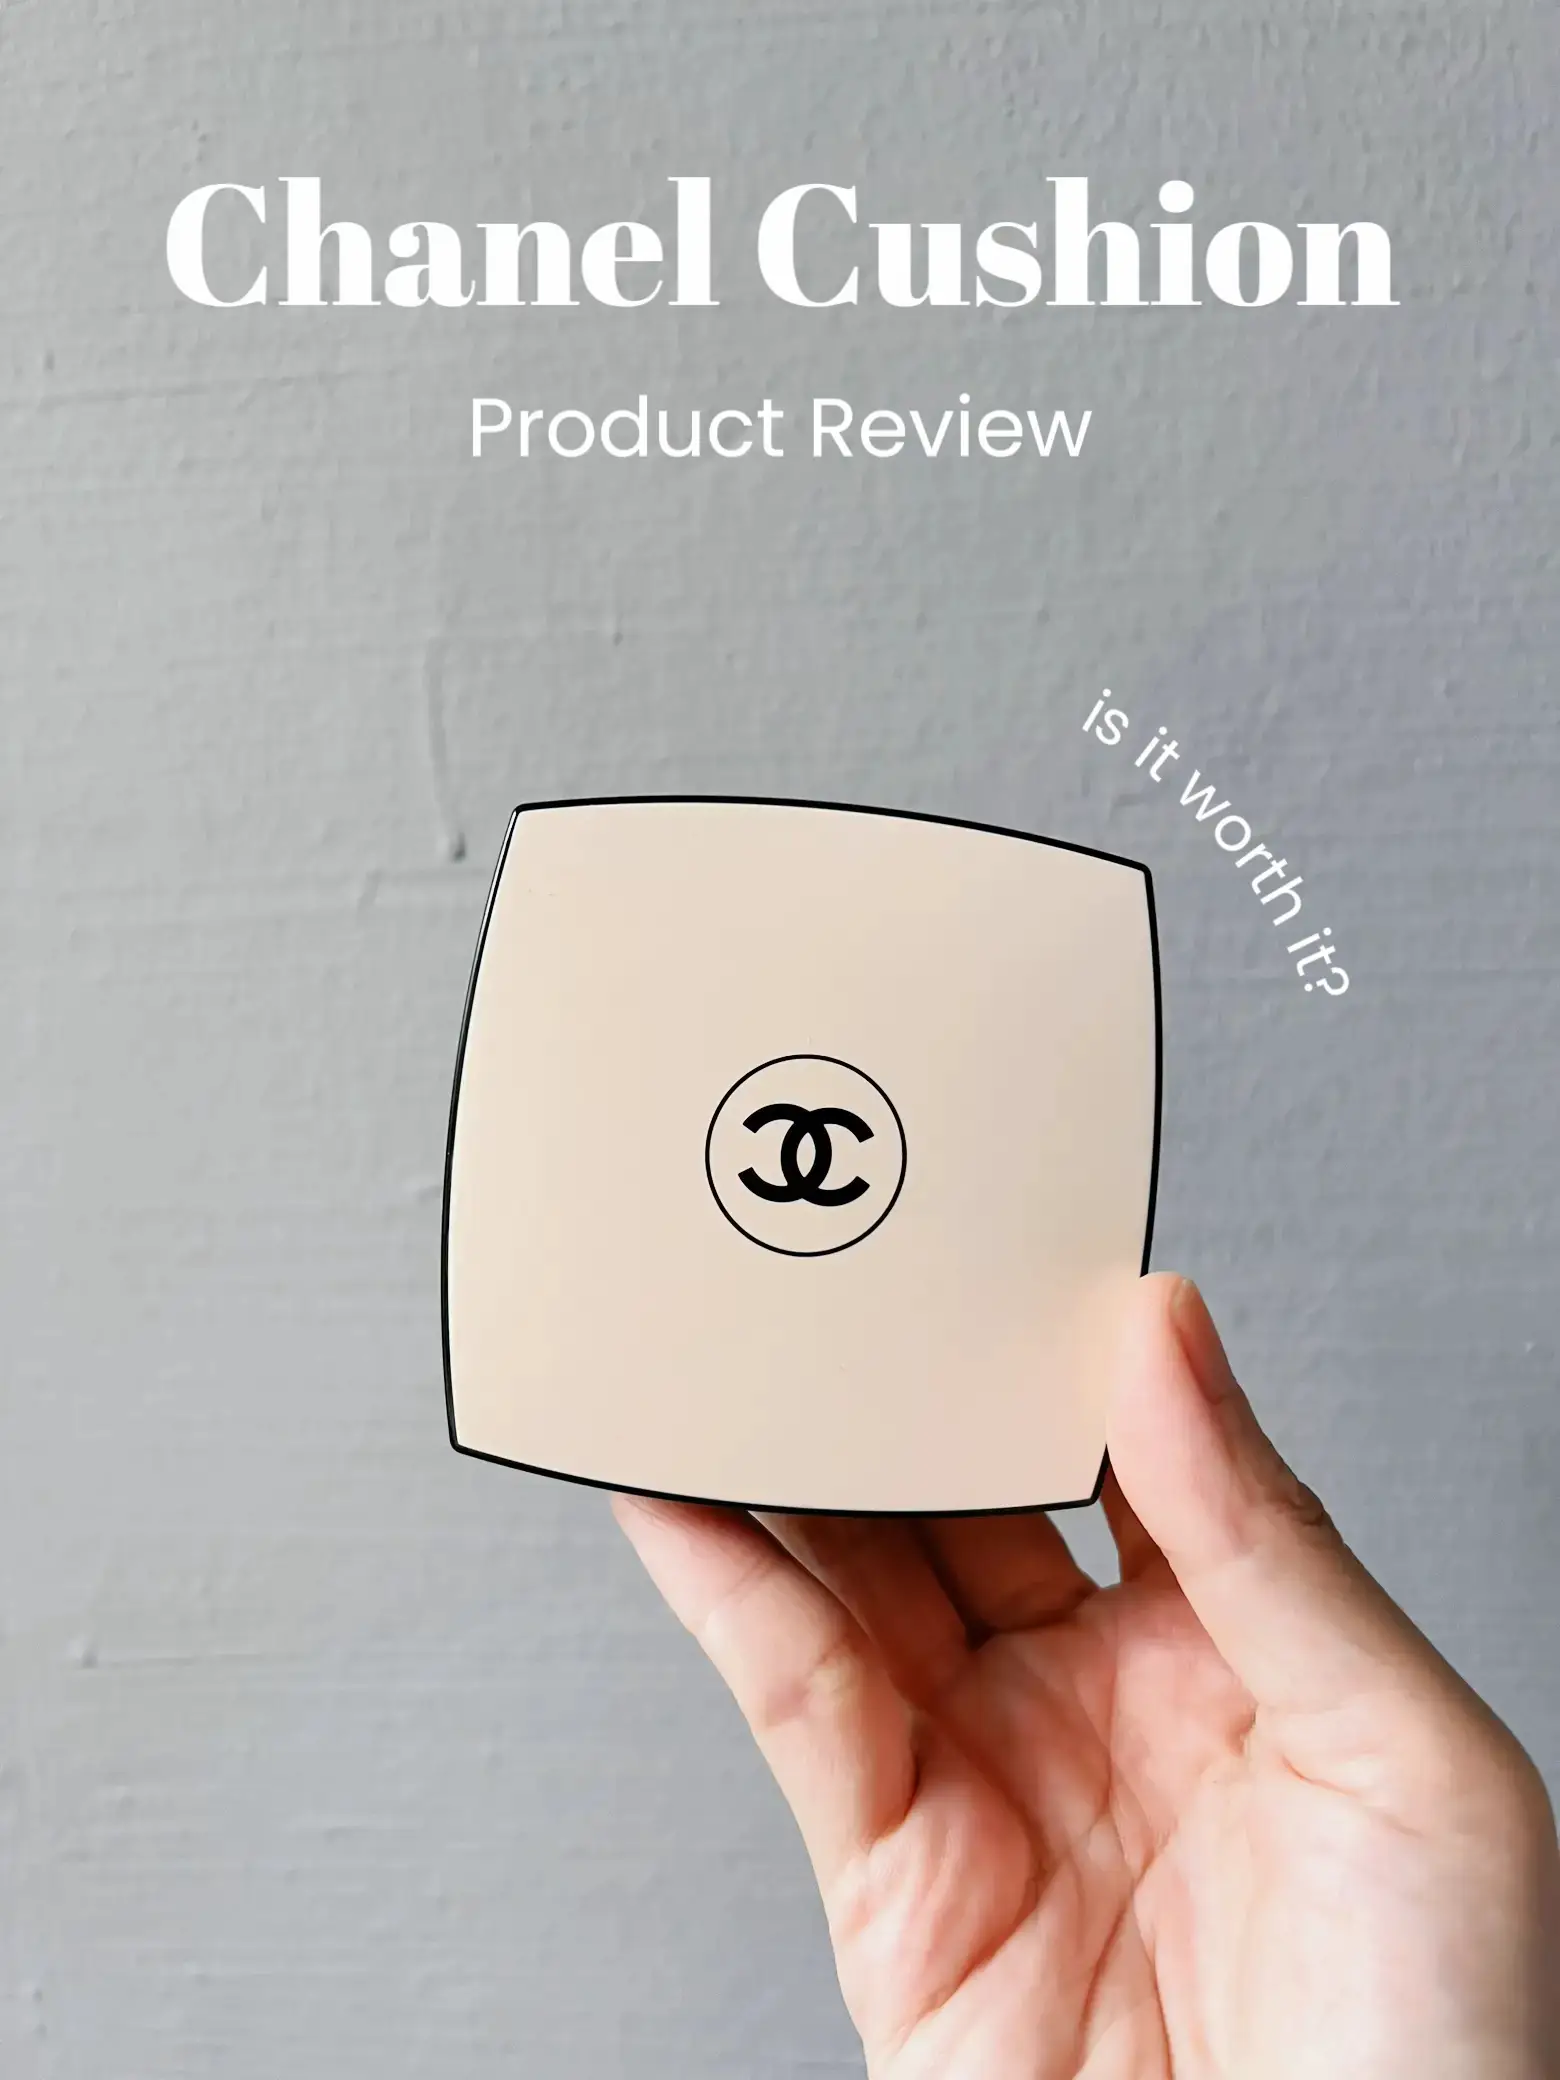 I tried the Chanel cushion foundation but…